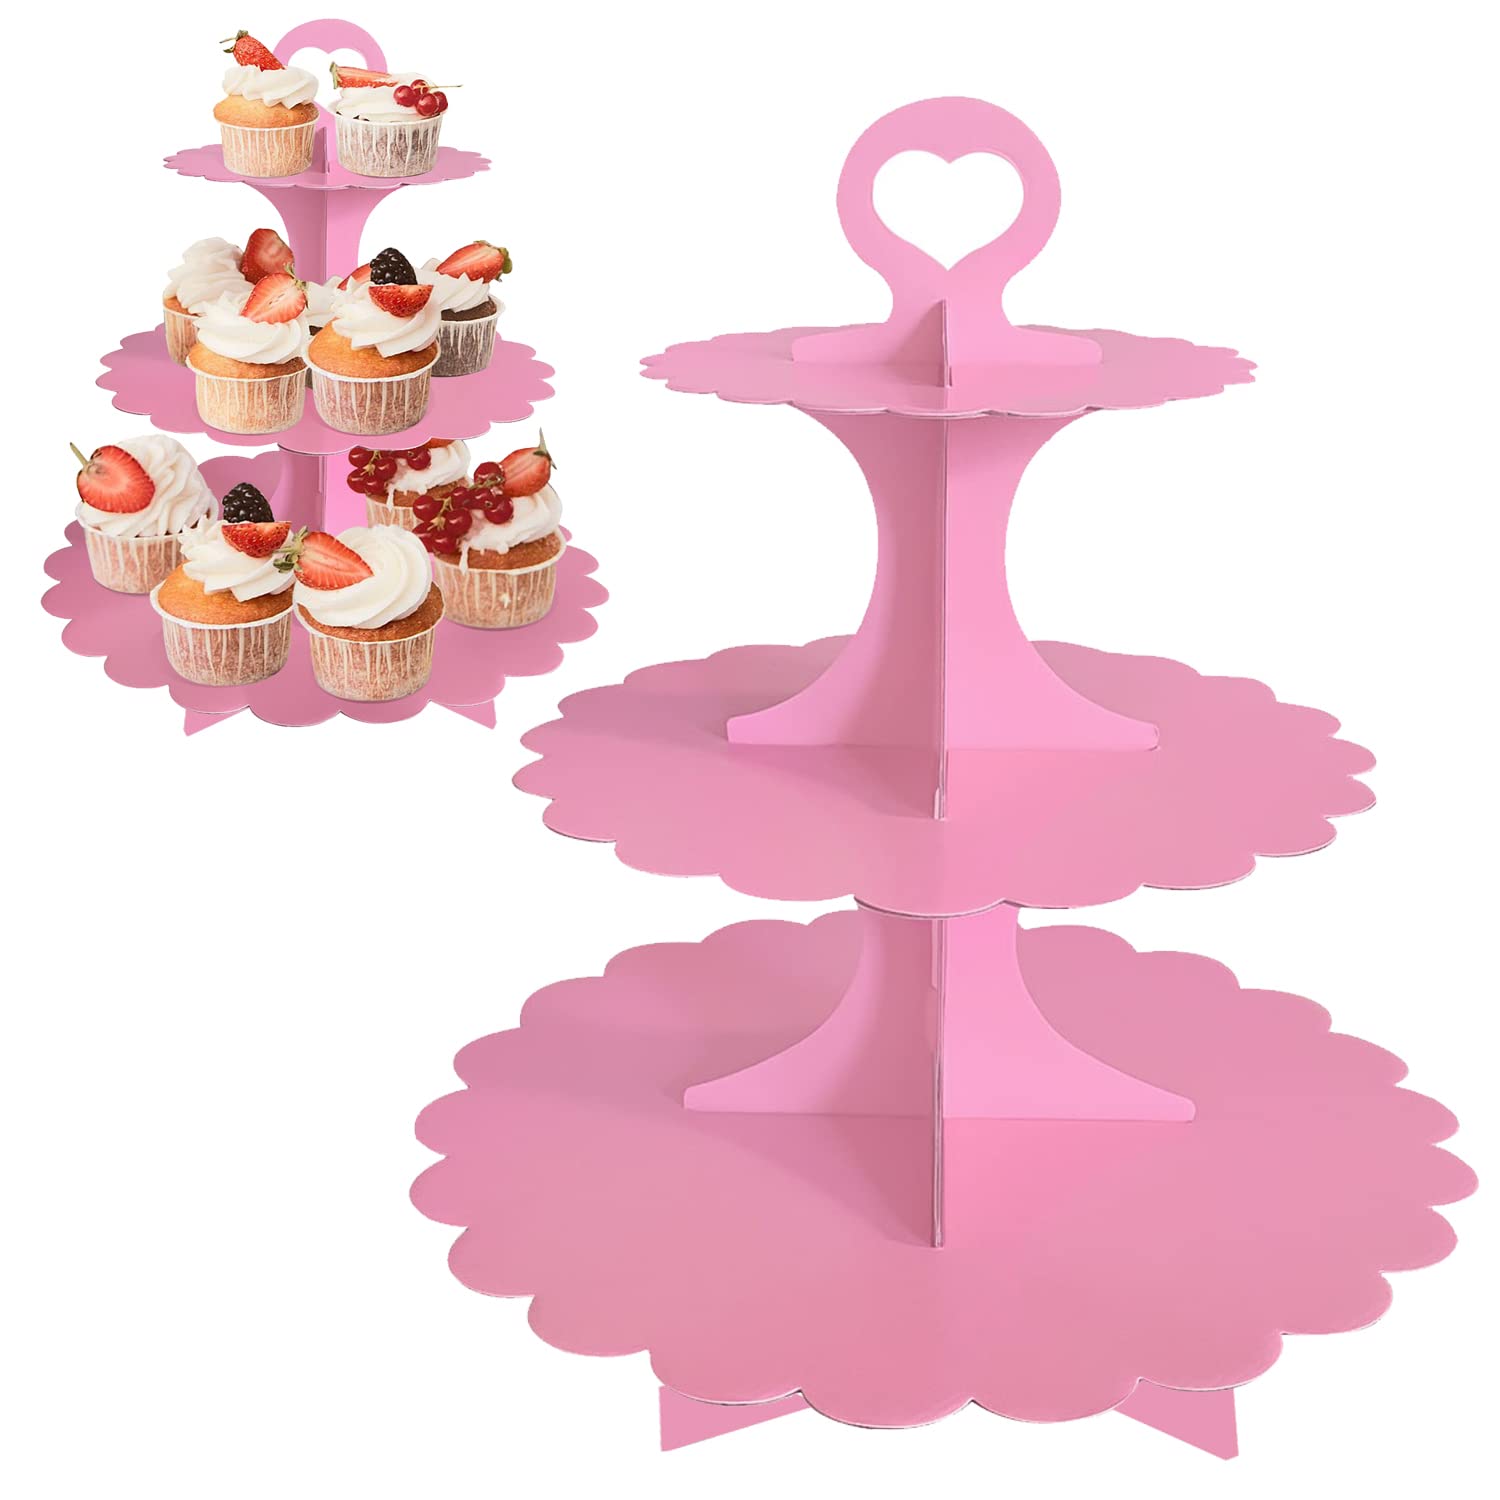 Humlindo 2 Pack Pink Cupcake Stand Tower, 3-Tier Cardboard Cup Cake Display Dessert Holder for Parties Holidays Birthday Party Wedding Baby Shower Anniversaries Decoration, Tiered Cupcake Stand